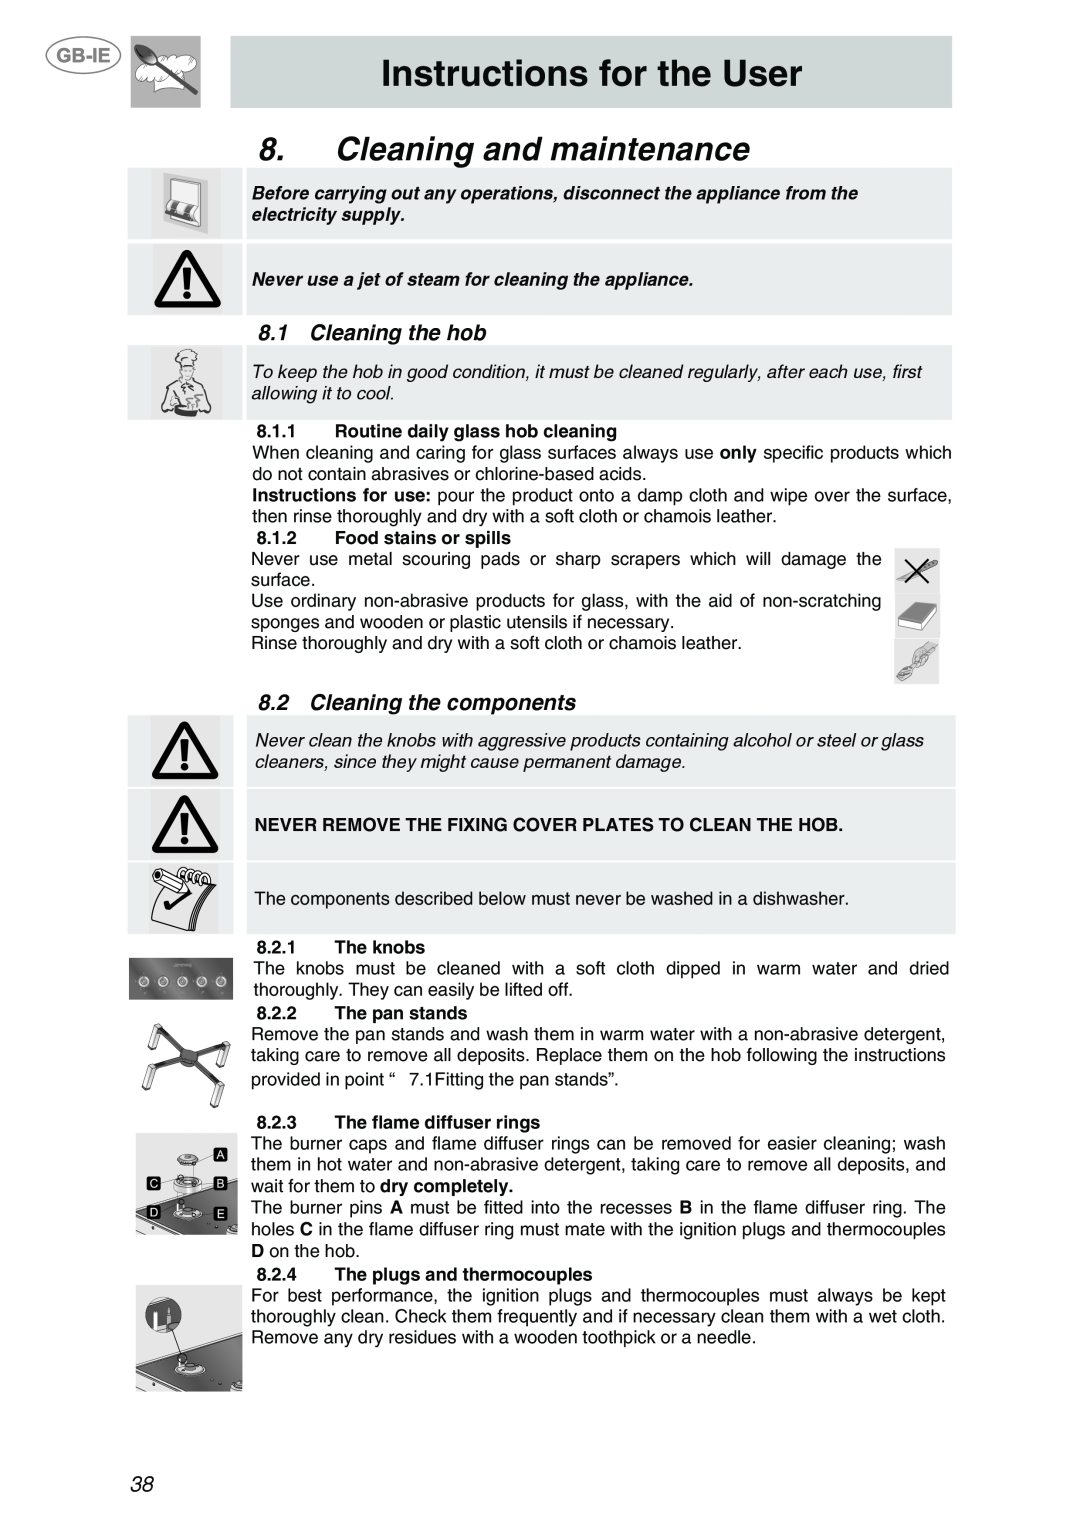 Smeg PVA750 Cleaning and maintenance, Instructions for the User, Cleaning the hob, Cleaning the components, 8.2.1The knobs 